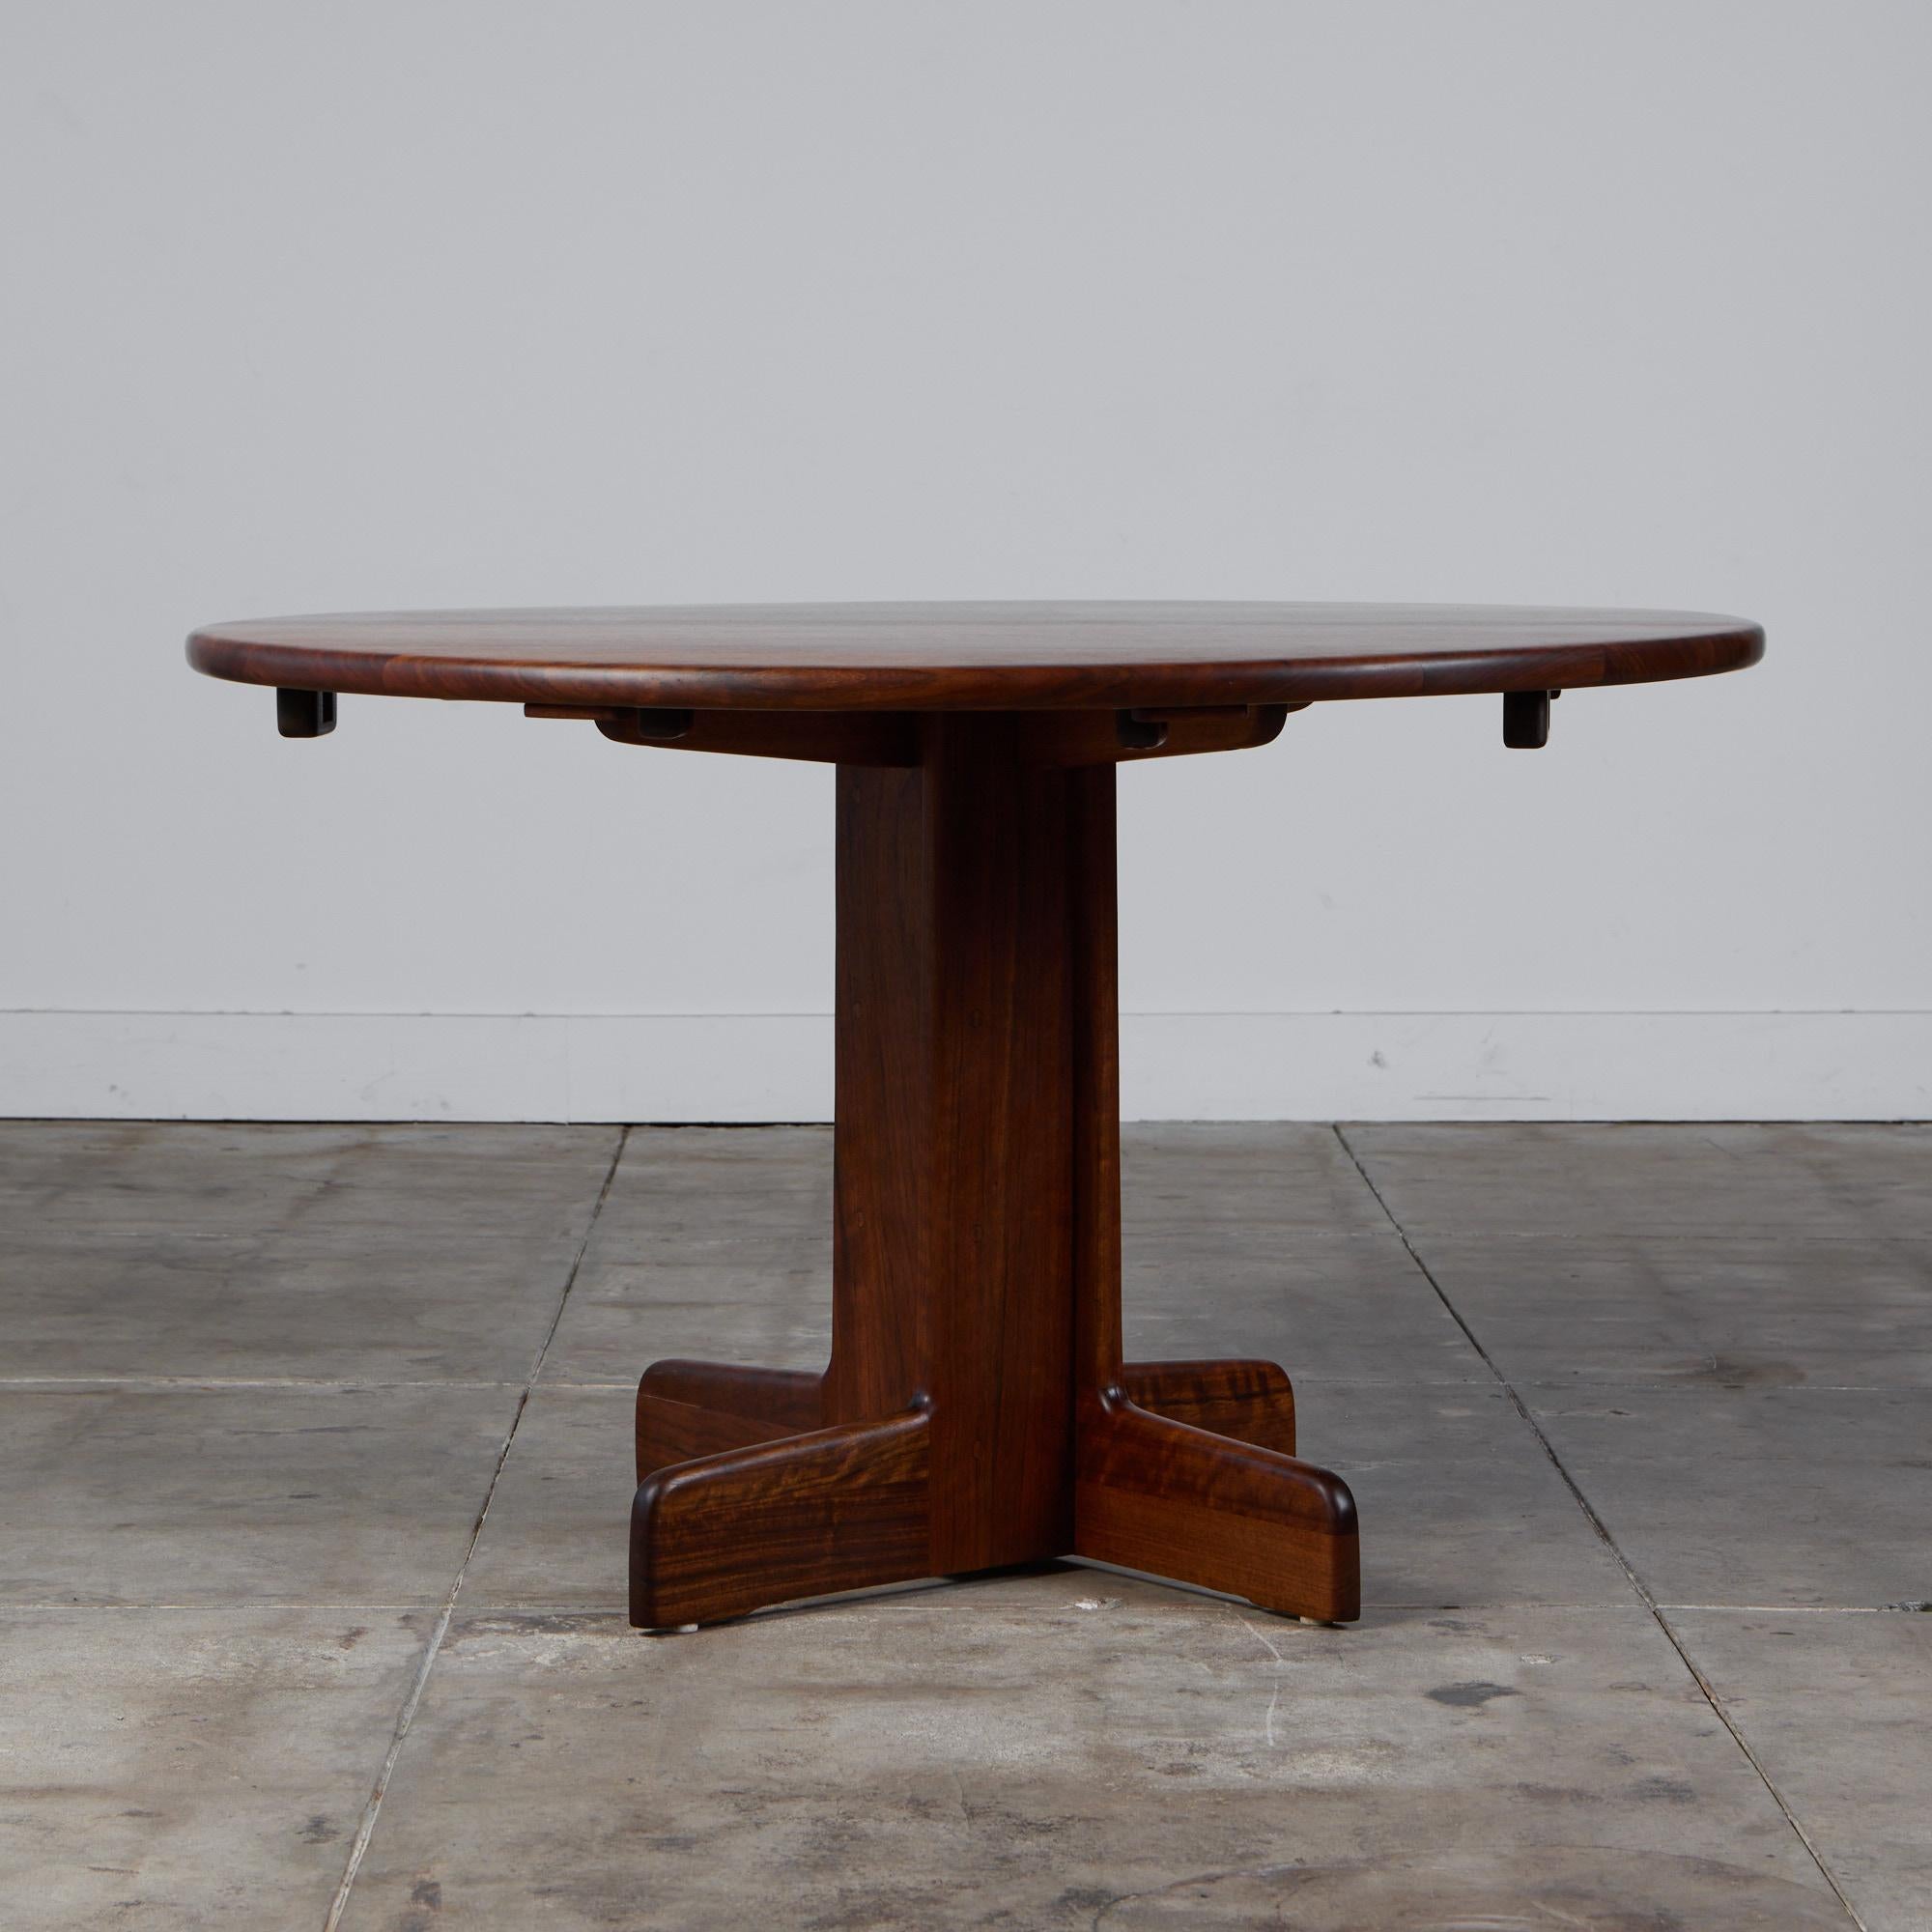 Wood Gerald McCabe Shedua Dining Table